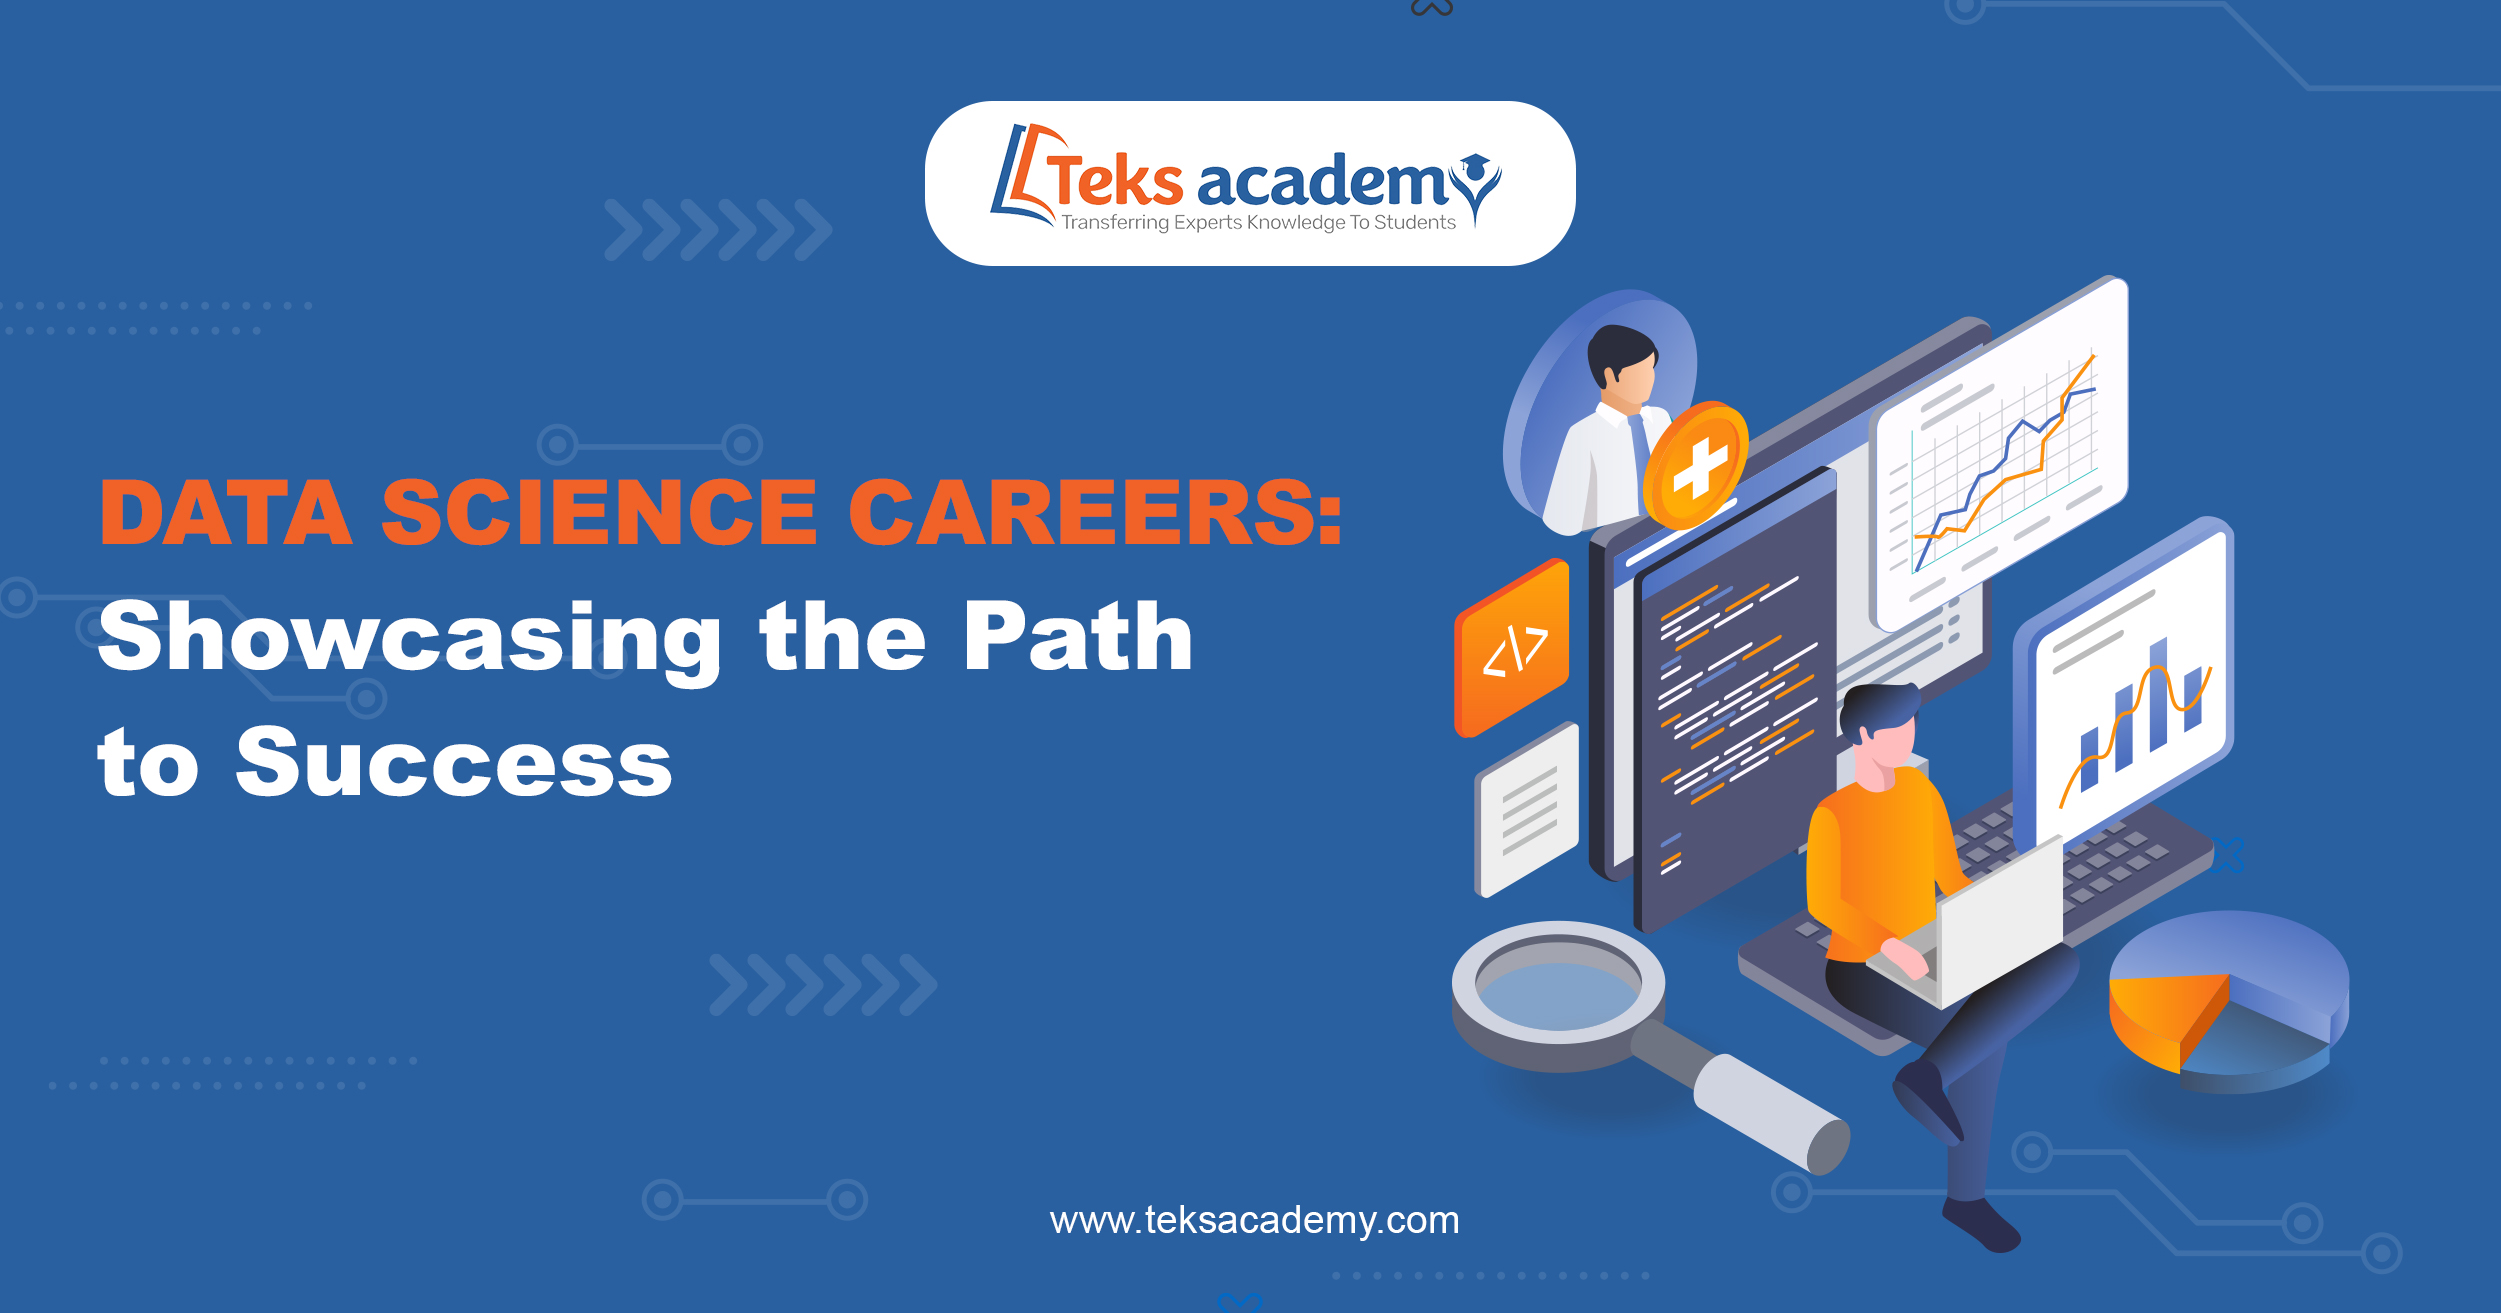 Data Science Careers: Showcasing the Path to Success